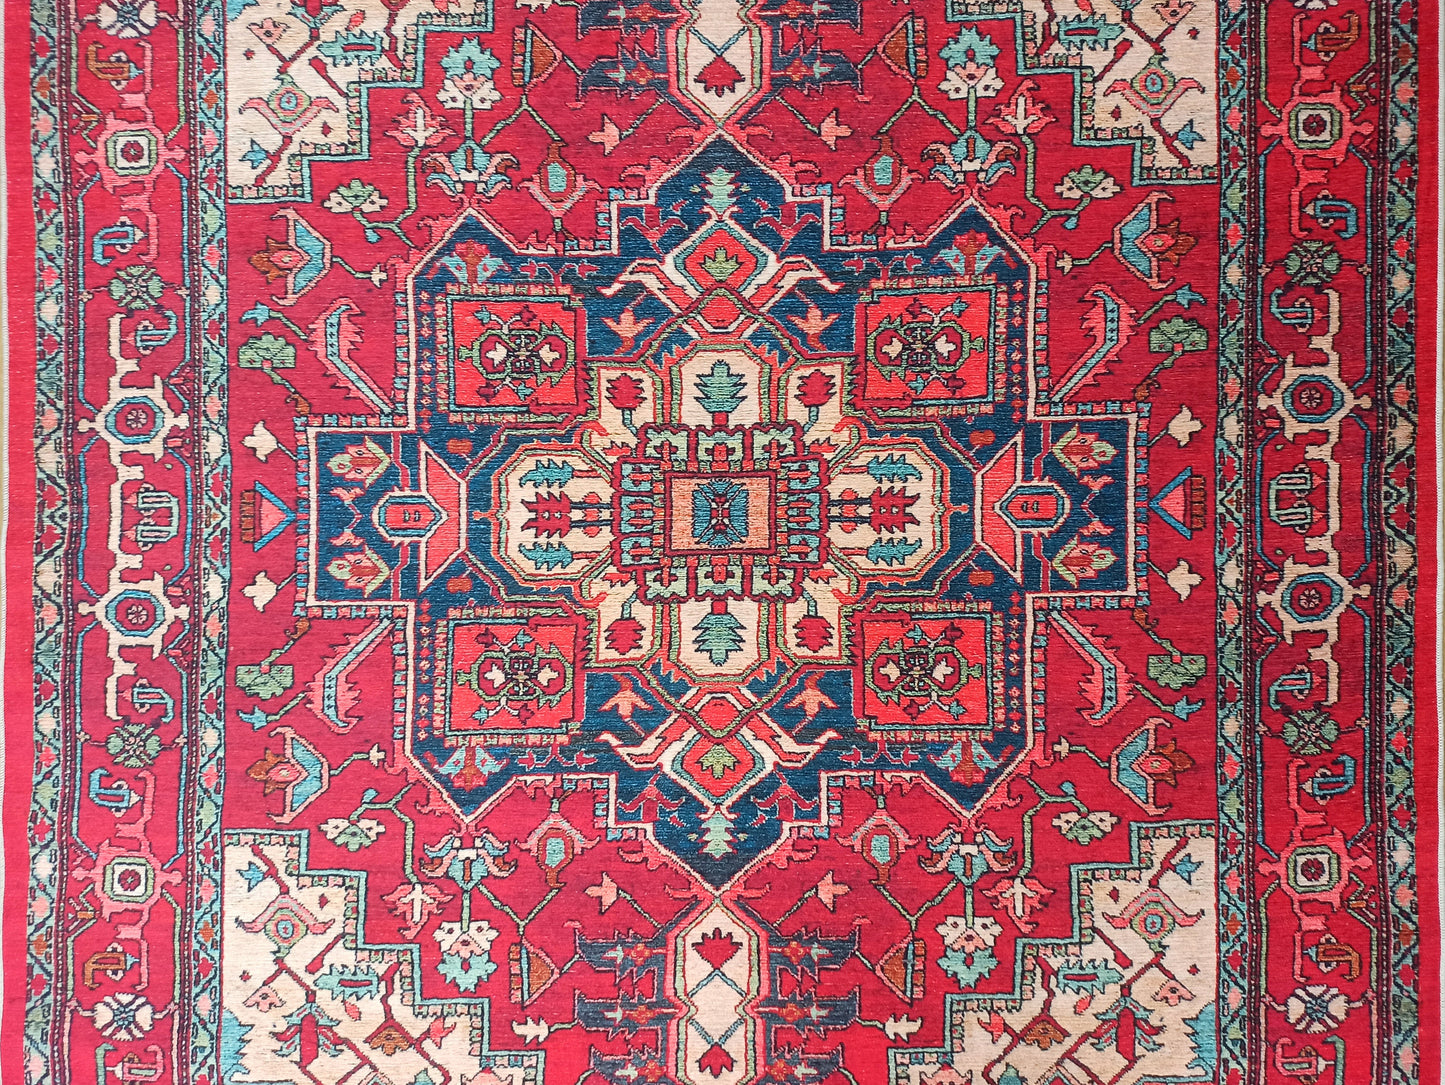 ALIN | Persian Heriz rug, Red Vintage style Geometric Oriental Faded Area rug, Bohemian Home decor, Mid-century Carpet, Fame Rugs, Teppich